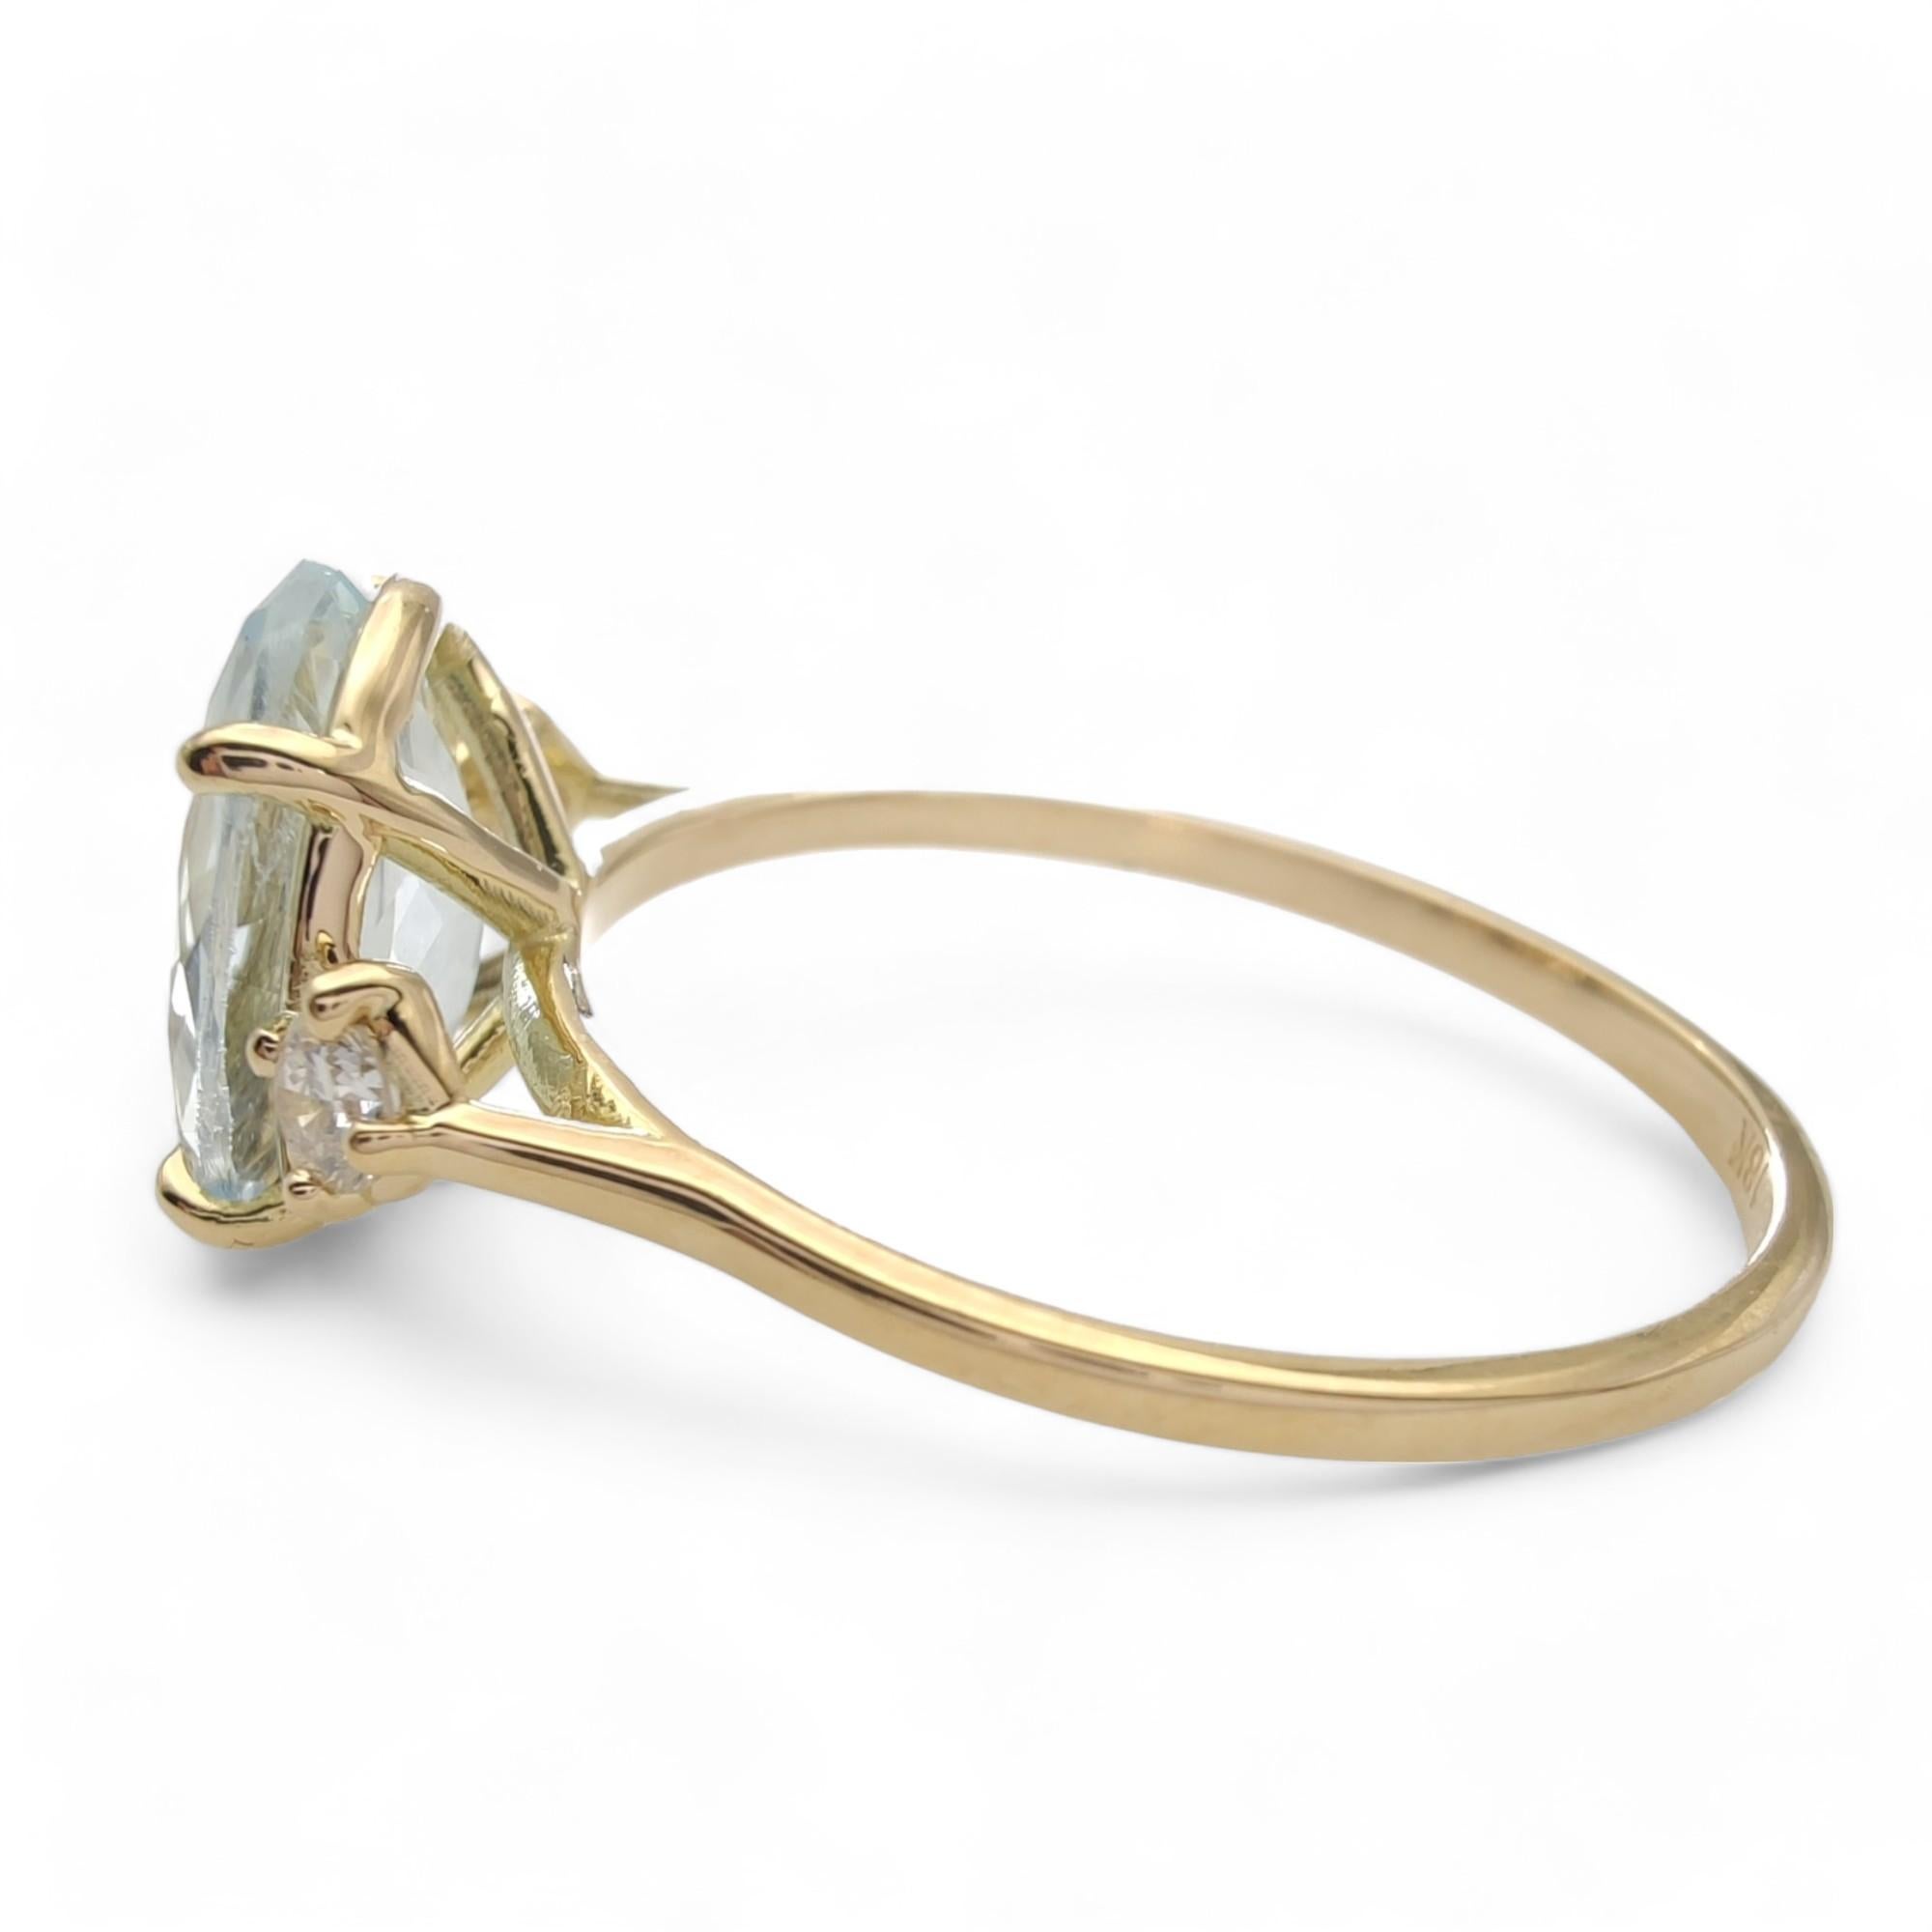 Contemporary 18K Gold Ring with 1.86 Carat Aquamarine and Diamonds for Weddings -Engagement For Sale